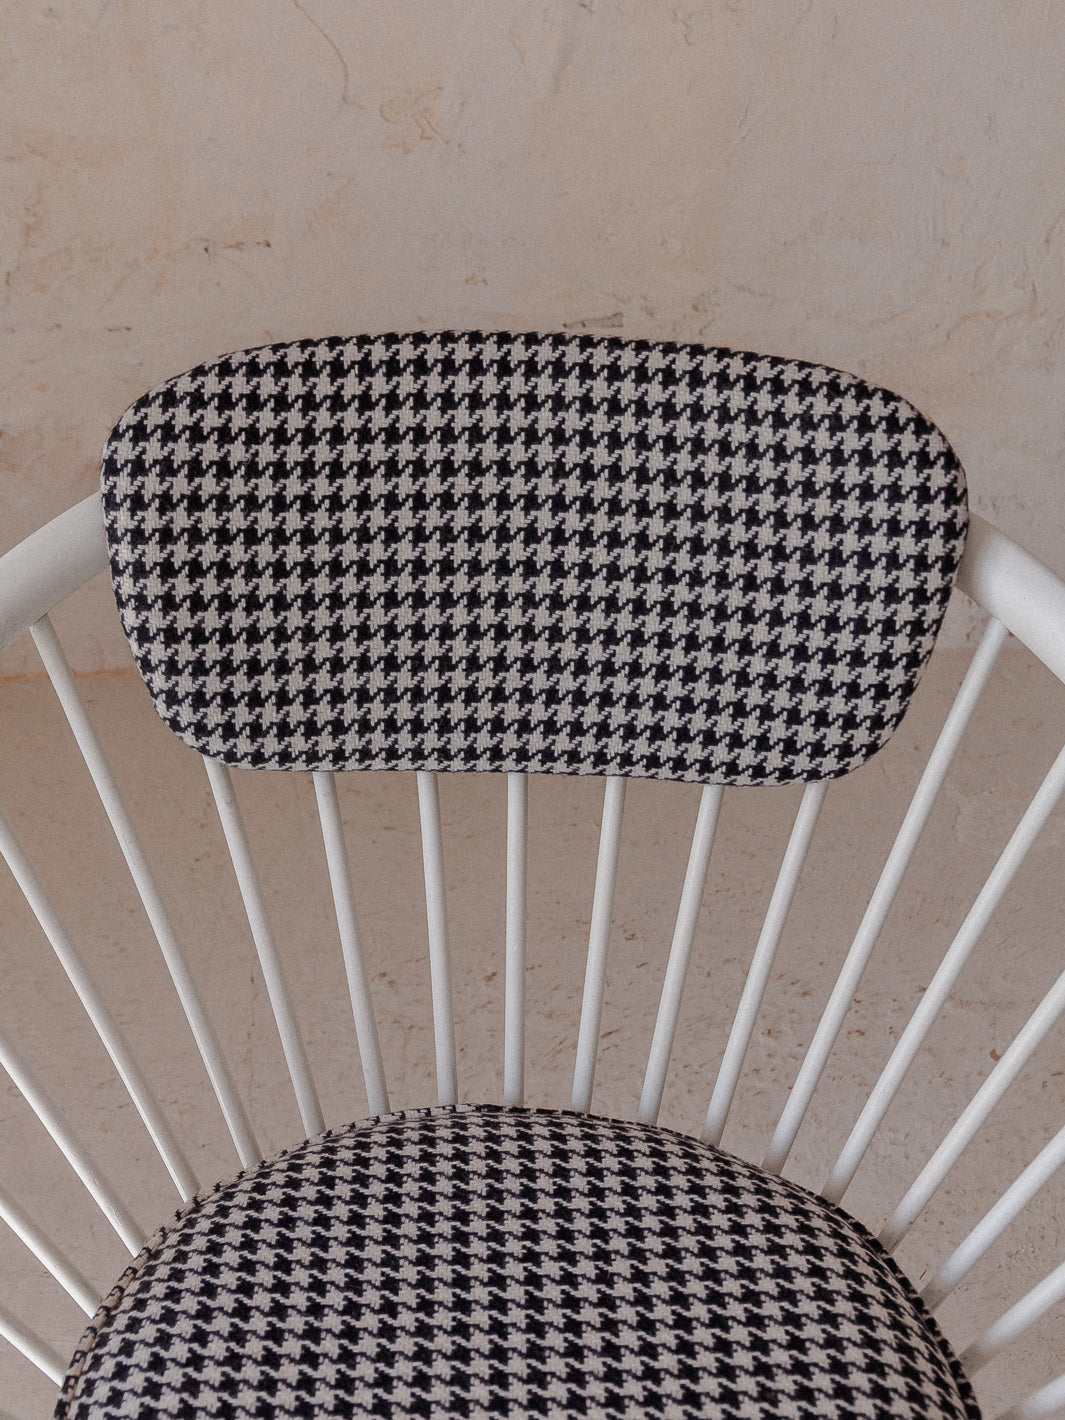 Pair of Circle armchairs, 1950s, houndstooth